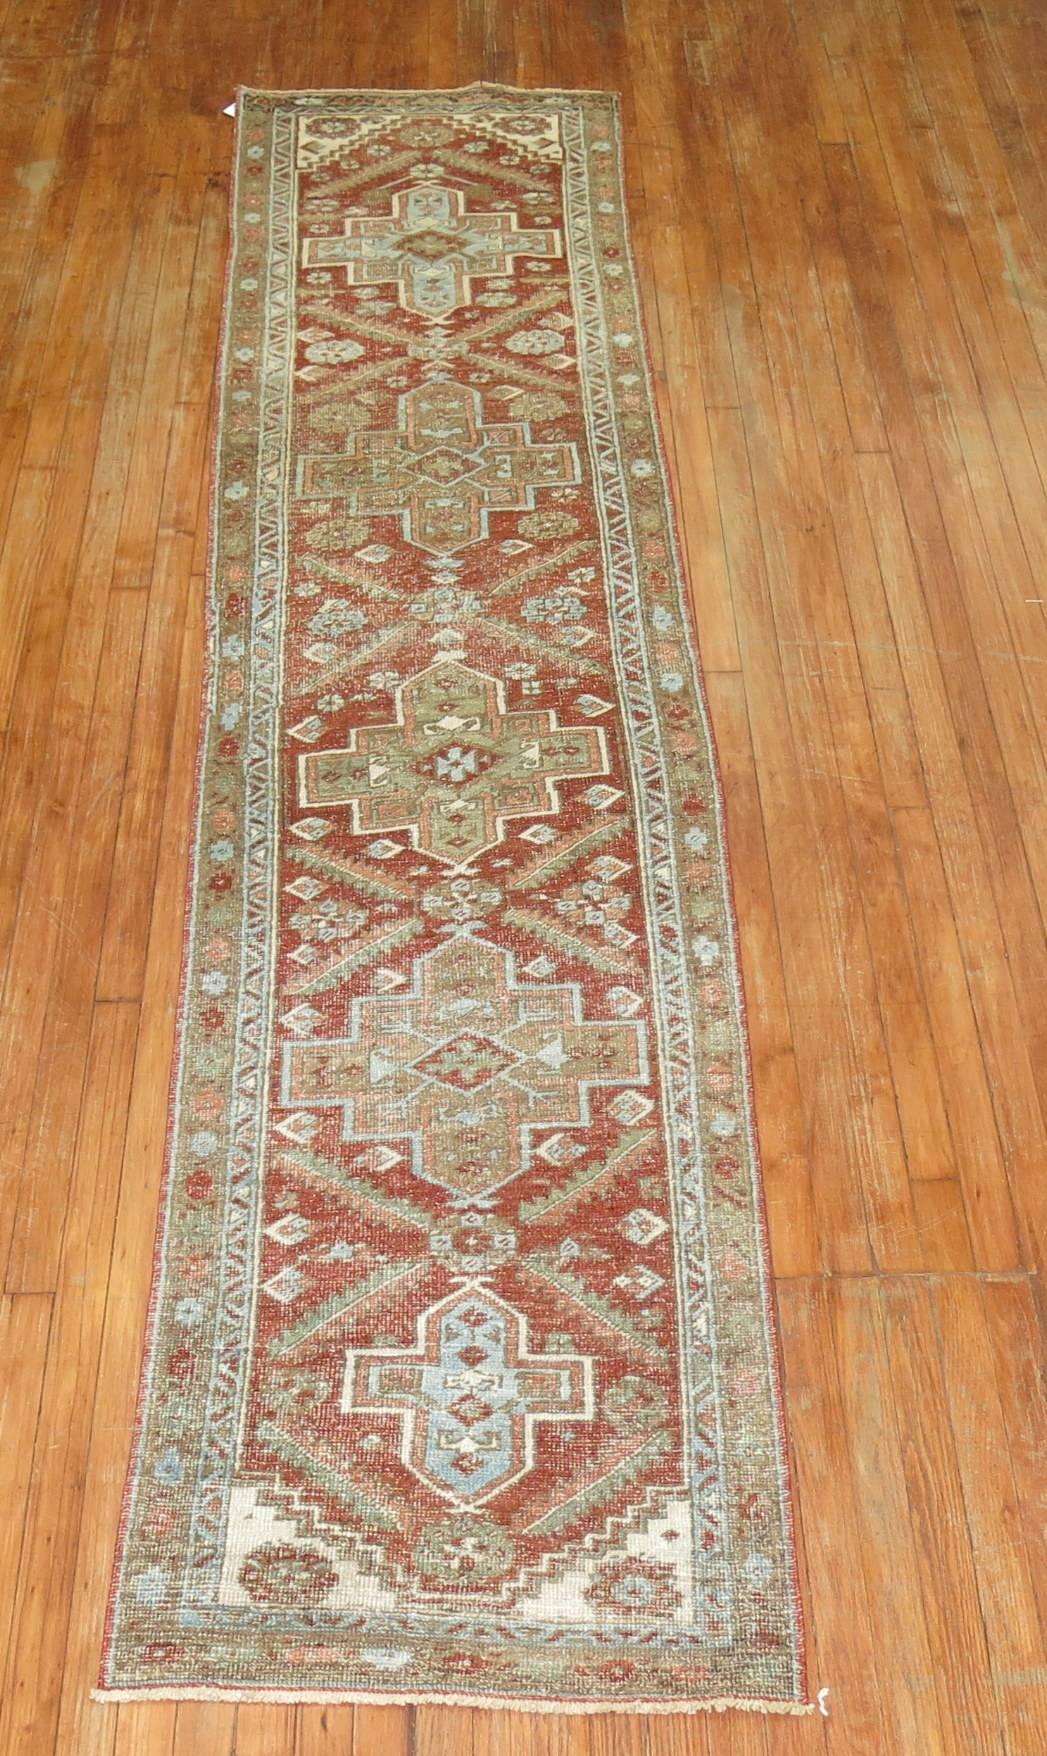 Persian Heriz one of a kind antique runner with rustic vibes

Measures: 2'4